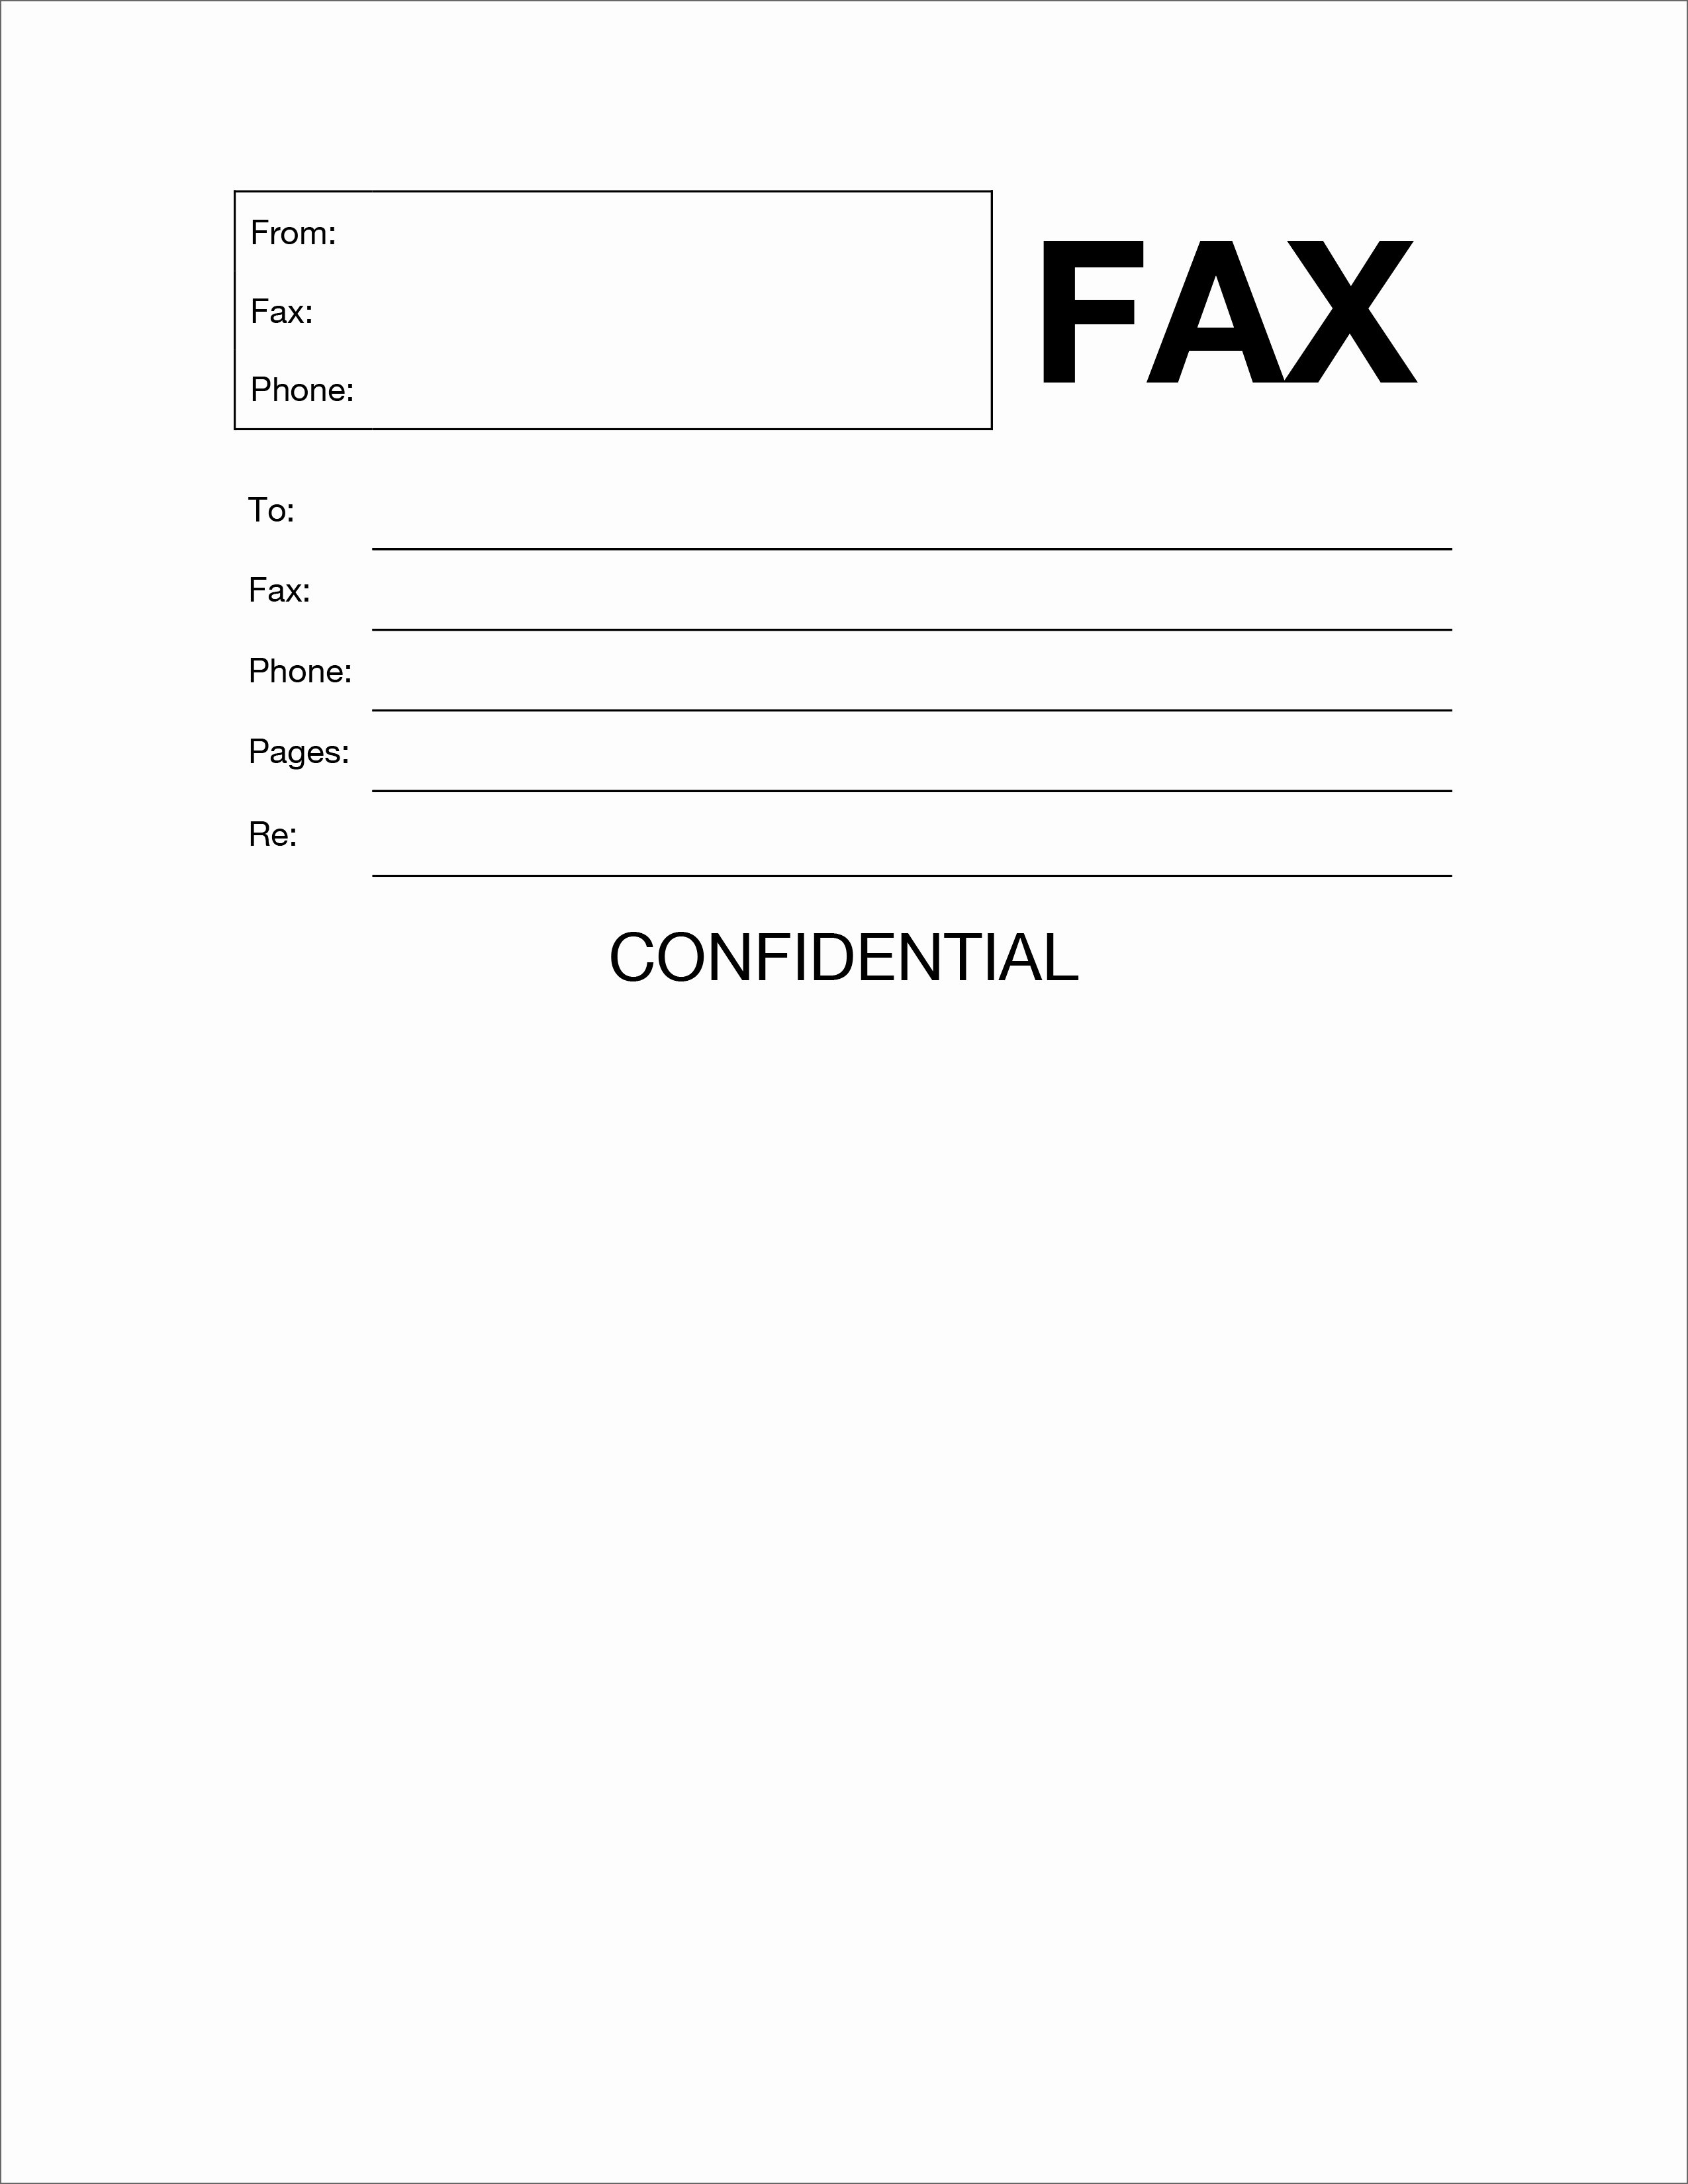 Fax Cover Page Template Best Of 20 Free Fax Cover Templates Sheets In Microsoft Fice Docx